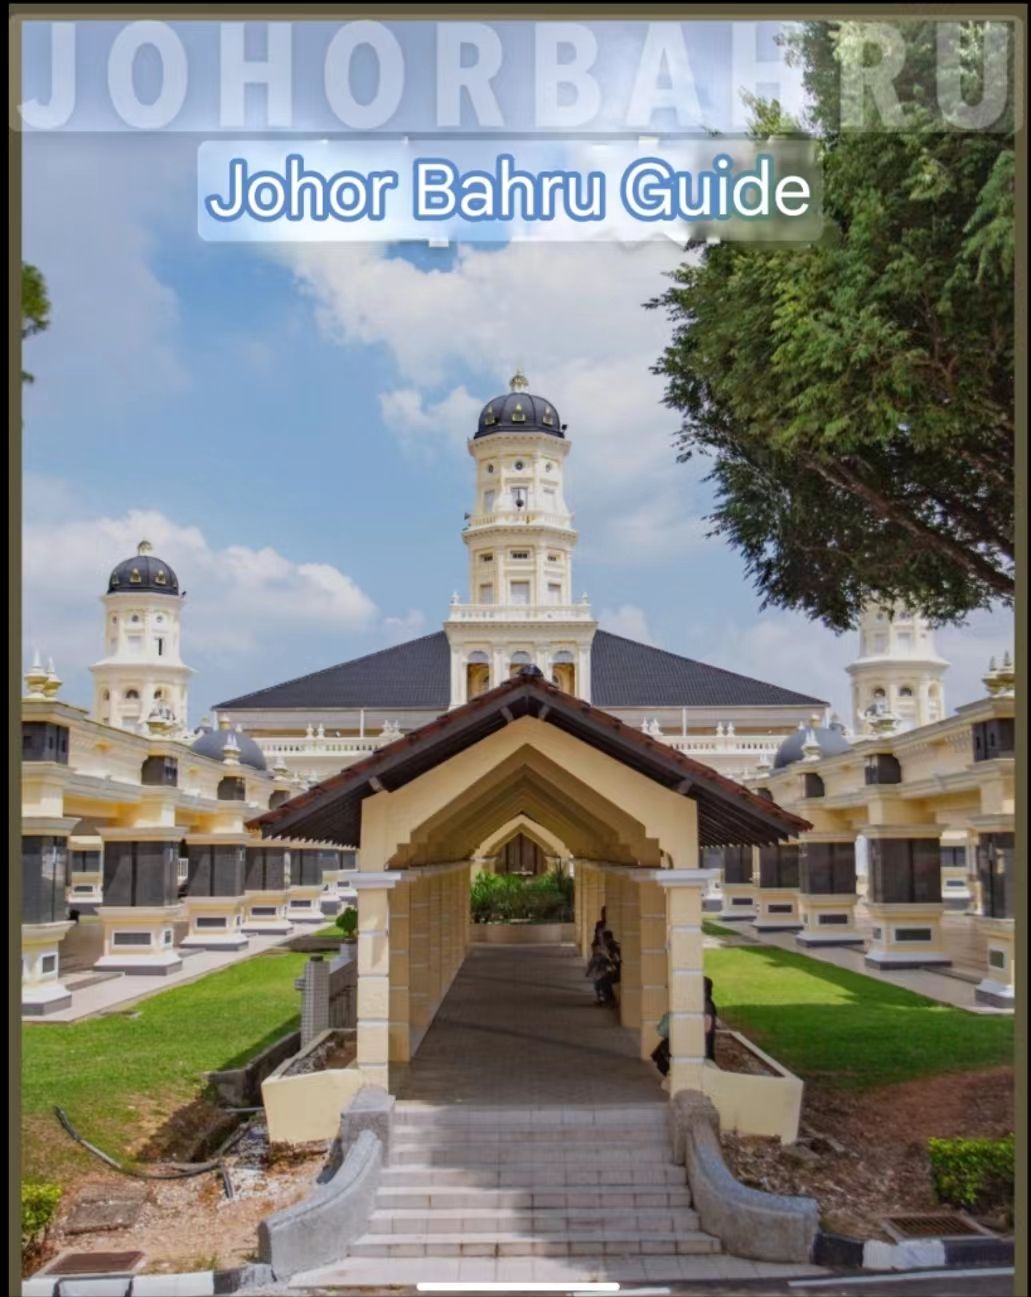 Johor Bahru, Malaysia | The most complete 1-day nanny guide, the capital of food